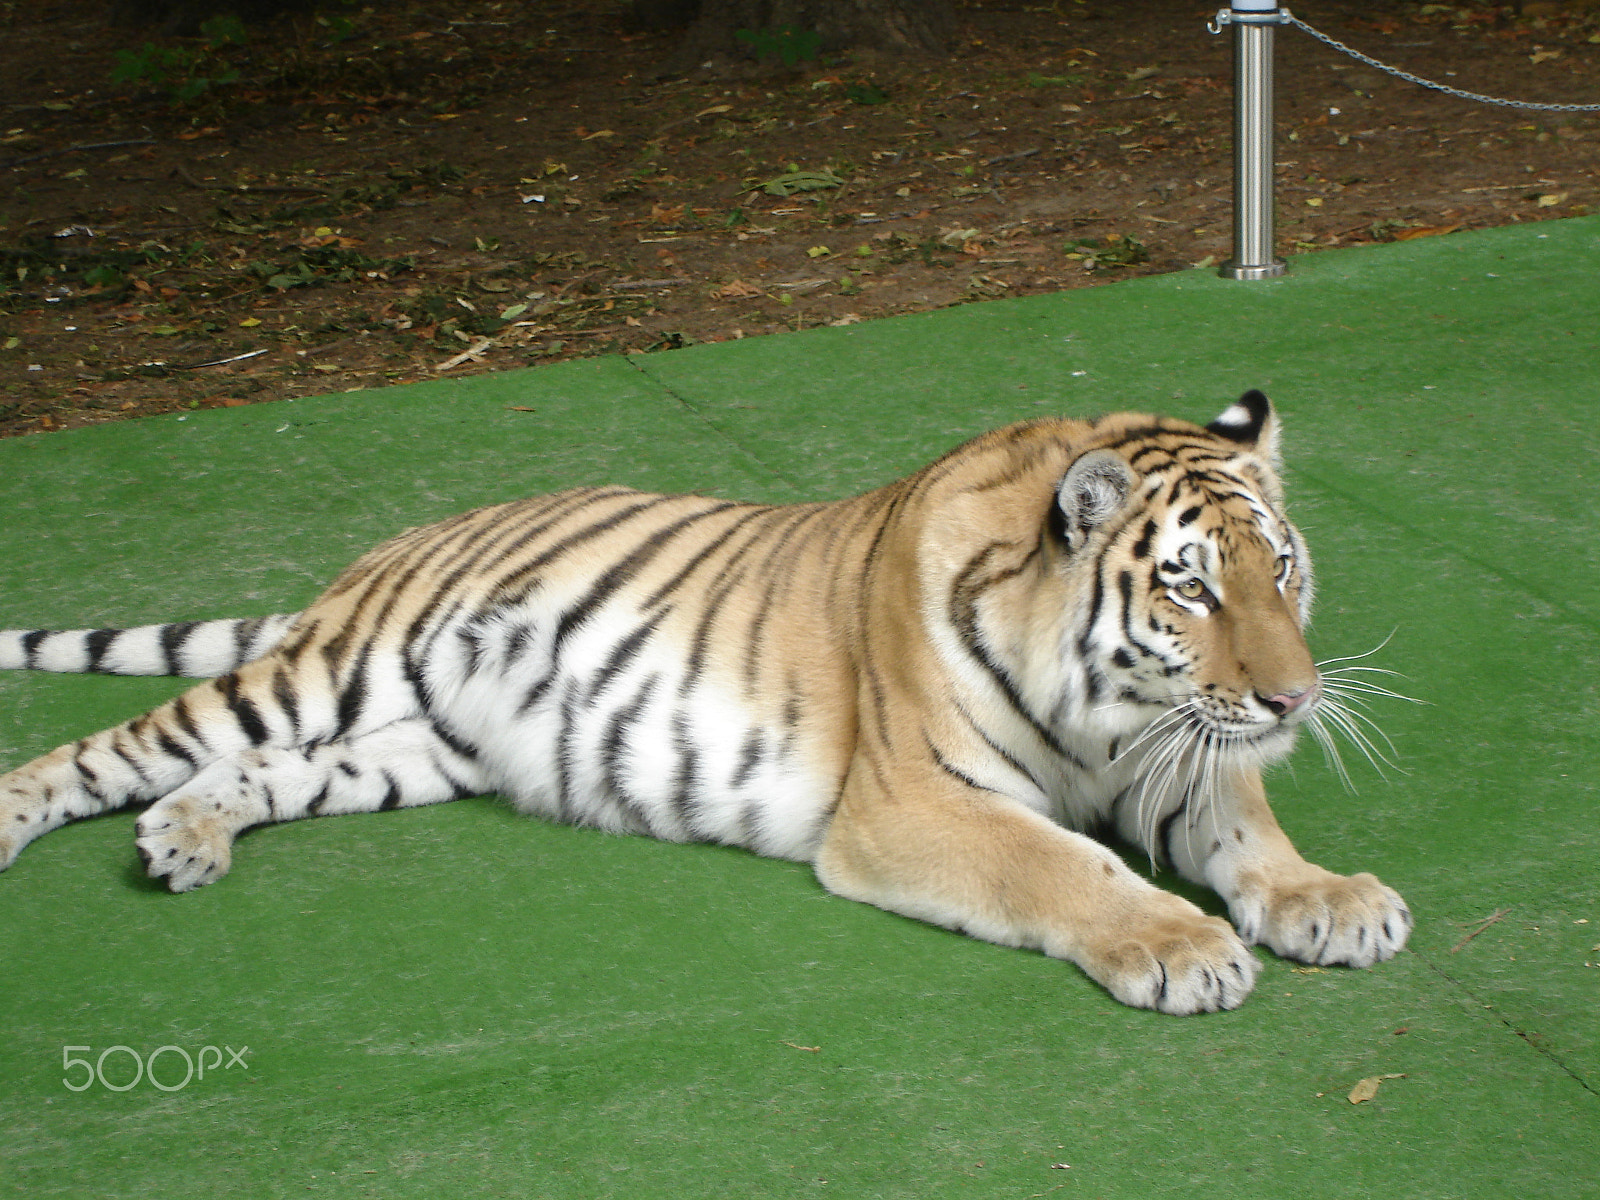 Sony DSC-W7 sample photo. Tiger lying on the green carpet photography